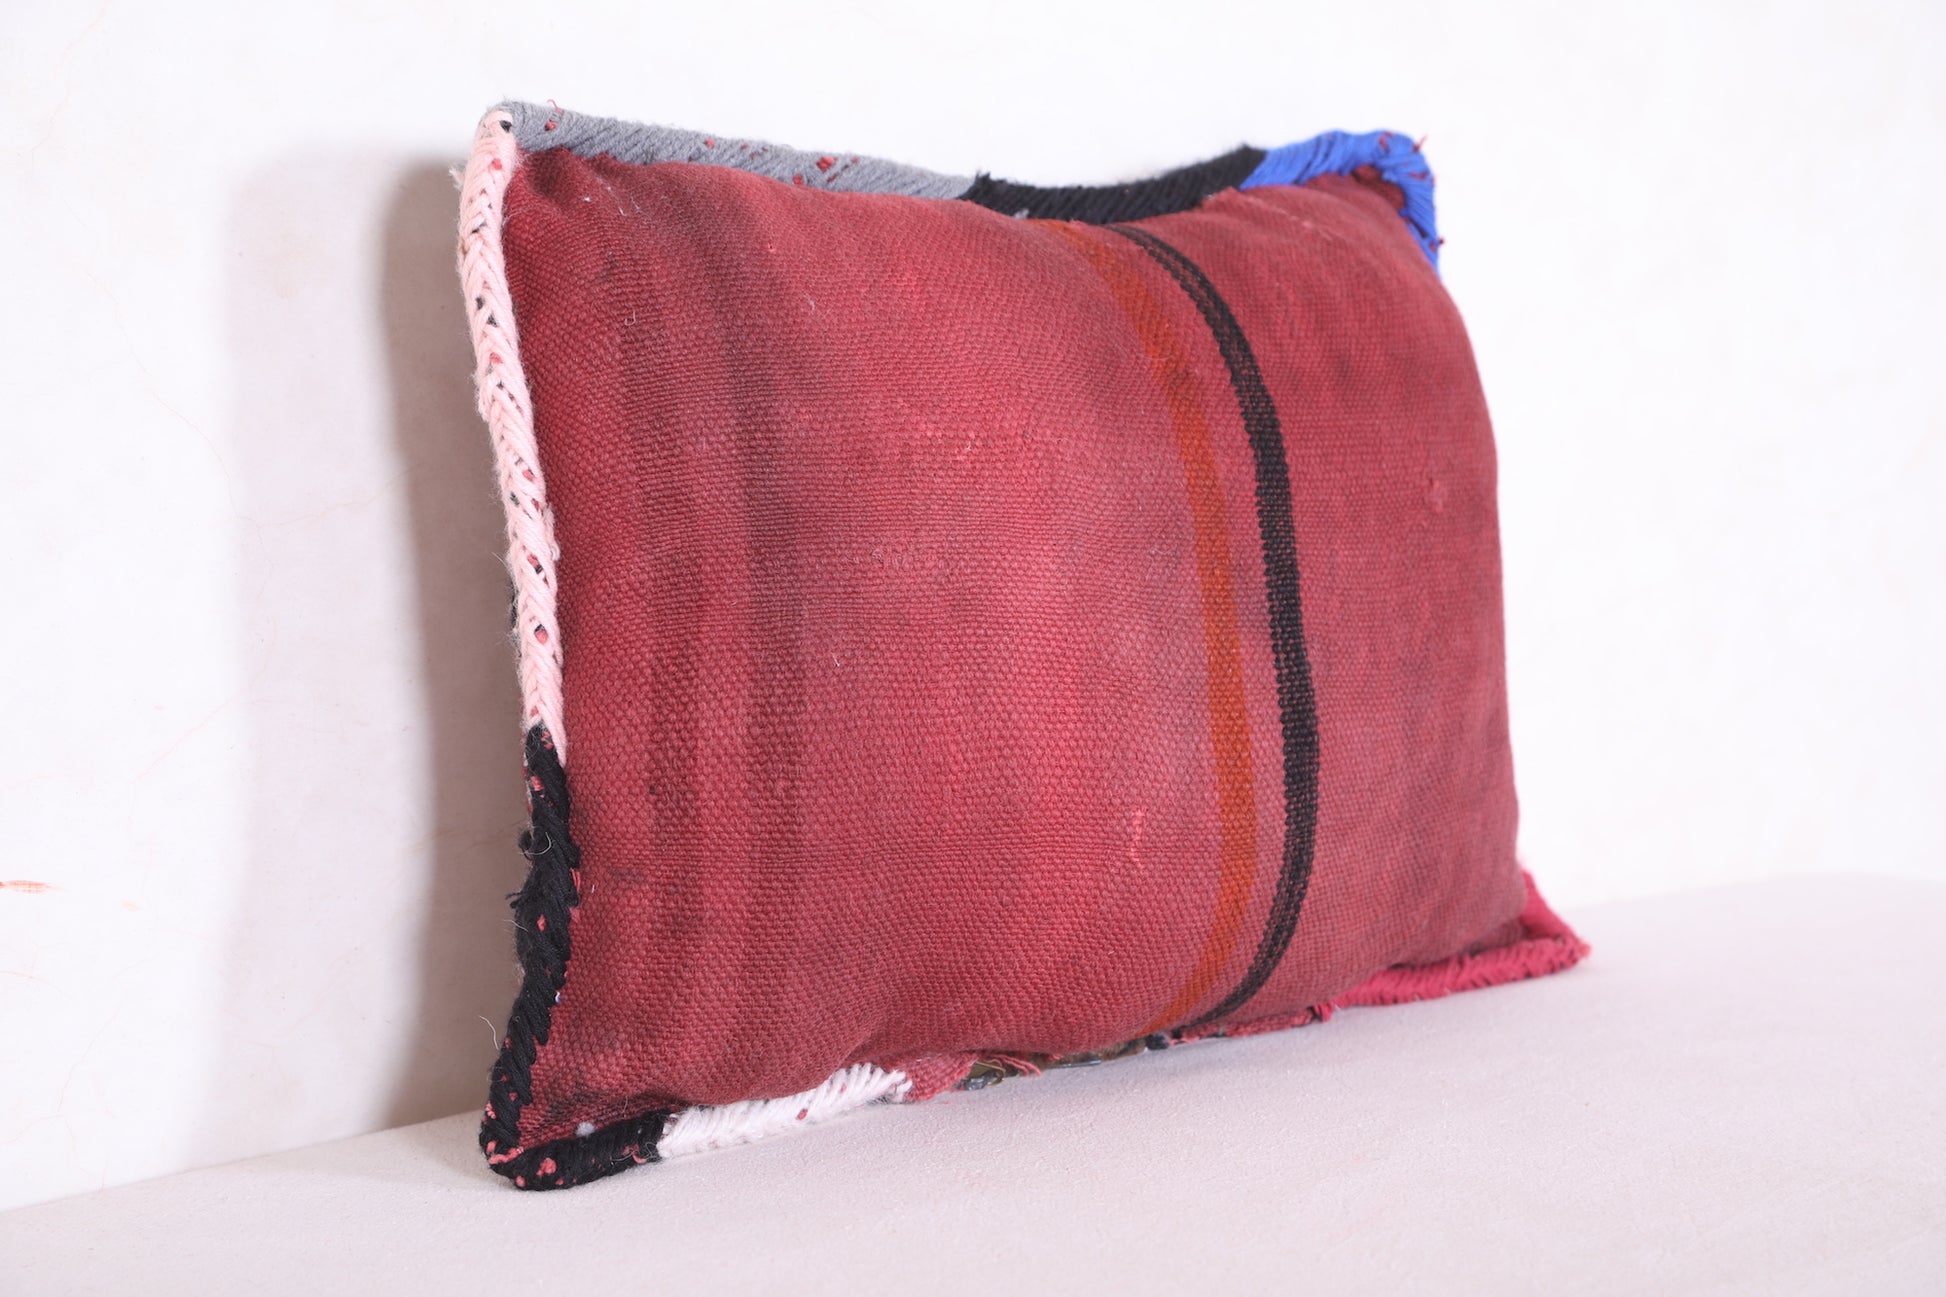 Moroccan pillow 14.9 INCHES X 19.6 INCHES